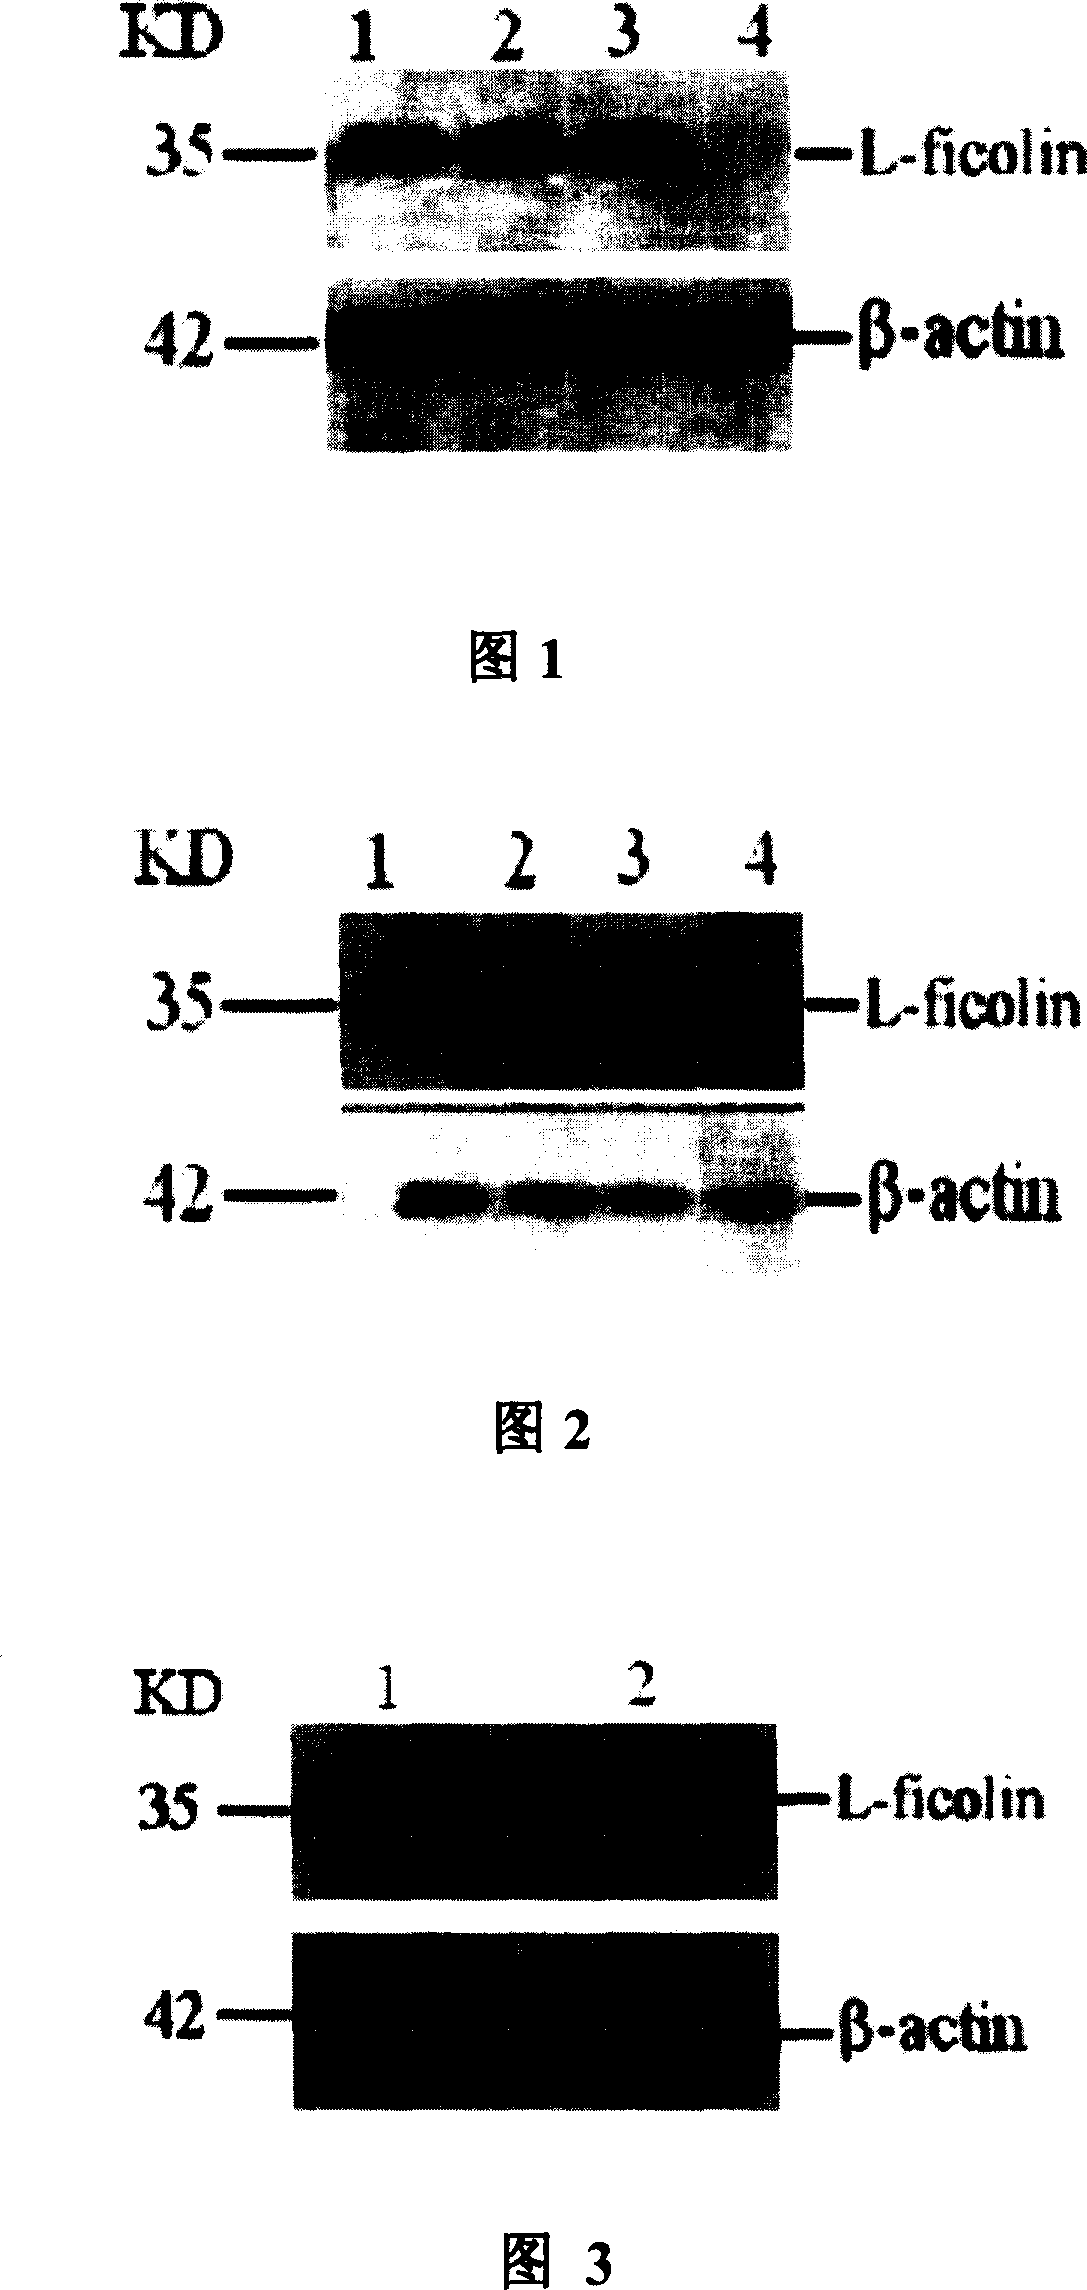 Expression carrier for human L-type complement agglutinant fibre gelled protein and construction and application